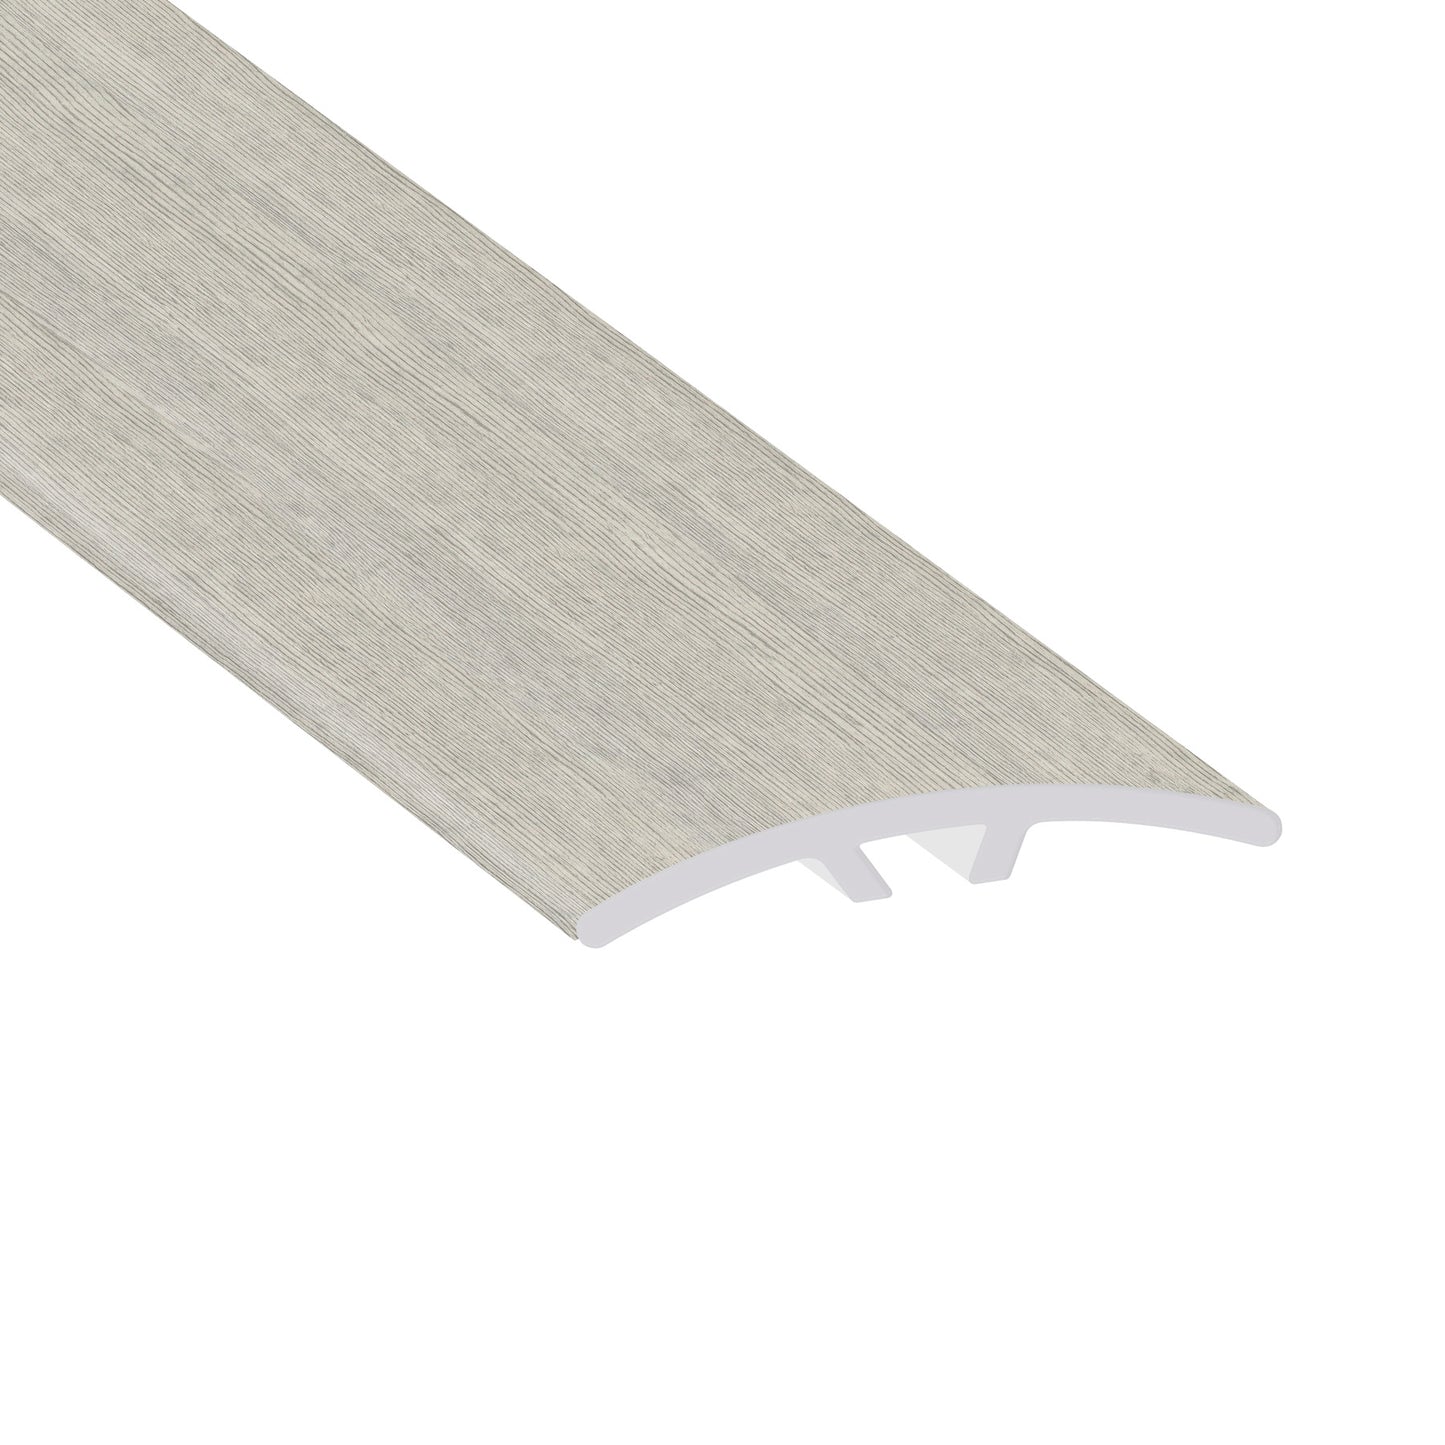 Morning Frost 0.23 in. Thich x 1.59 in. Width x 94 in. Length Multi-Purpose Reducer Vinyl Molding